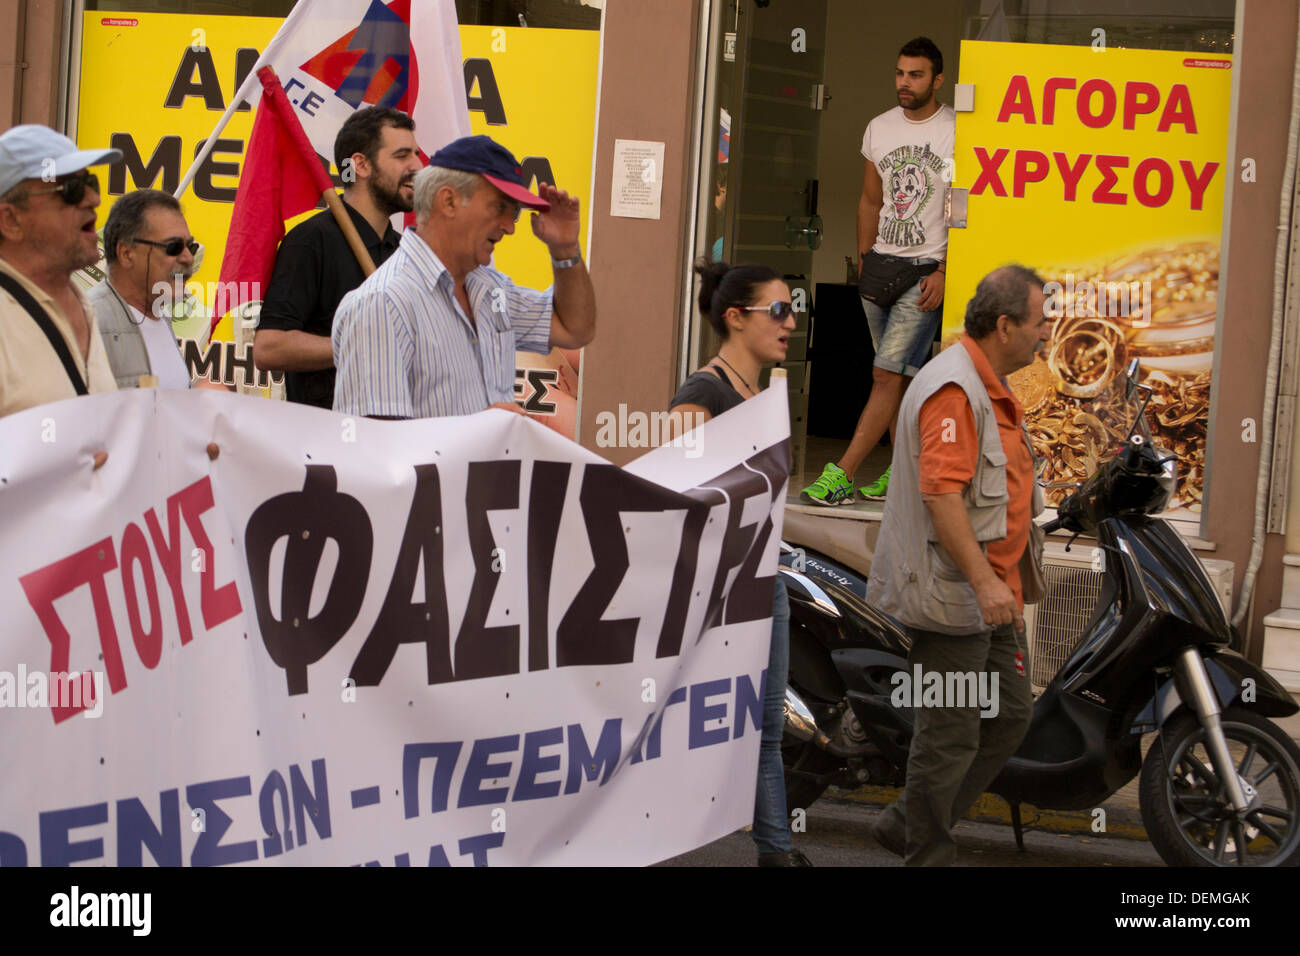 Nikaia, Athens, Greece, September 21st 2013. Following Pavlos Fyssas stabbing to death by a member of the neo-nazi, Golden Dawn party, Union members and leftists stage a demonstration  to protest against fascists. The anti-fascism march passes by a pawn shop. Credit:  Nikolas Georgiou / Alamy Live News Stock Photo